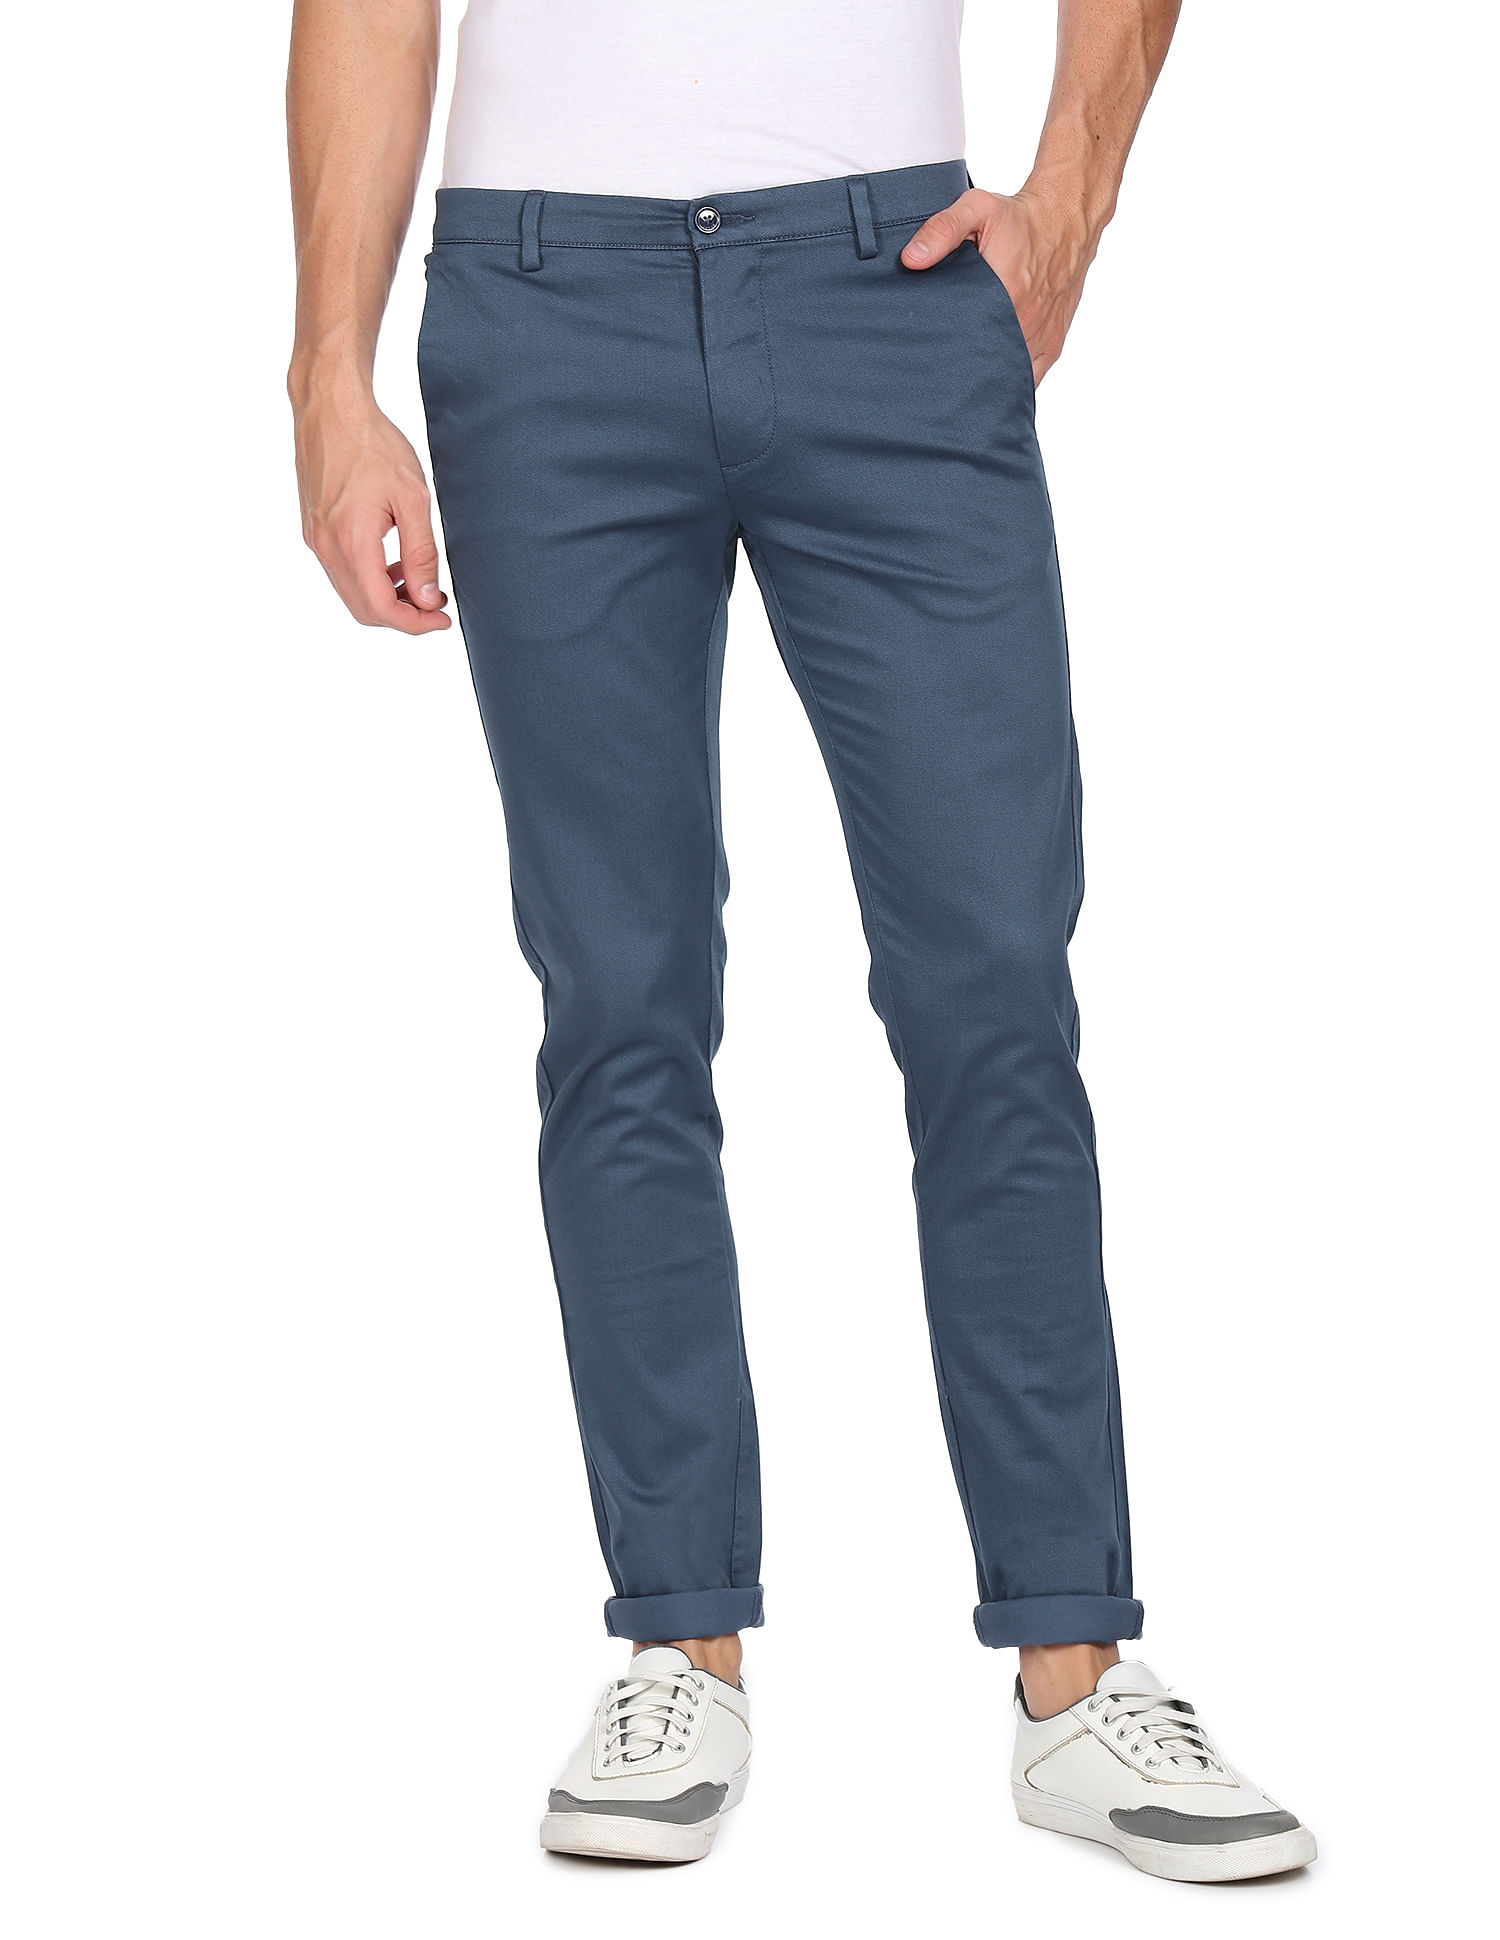 Buy Navy Tie-Up Trousers Online - RK India Store View